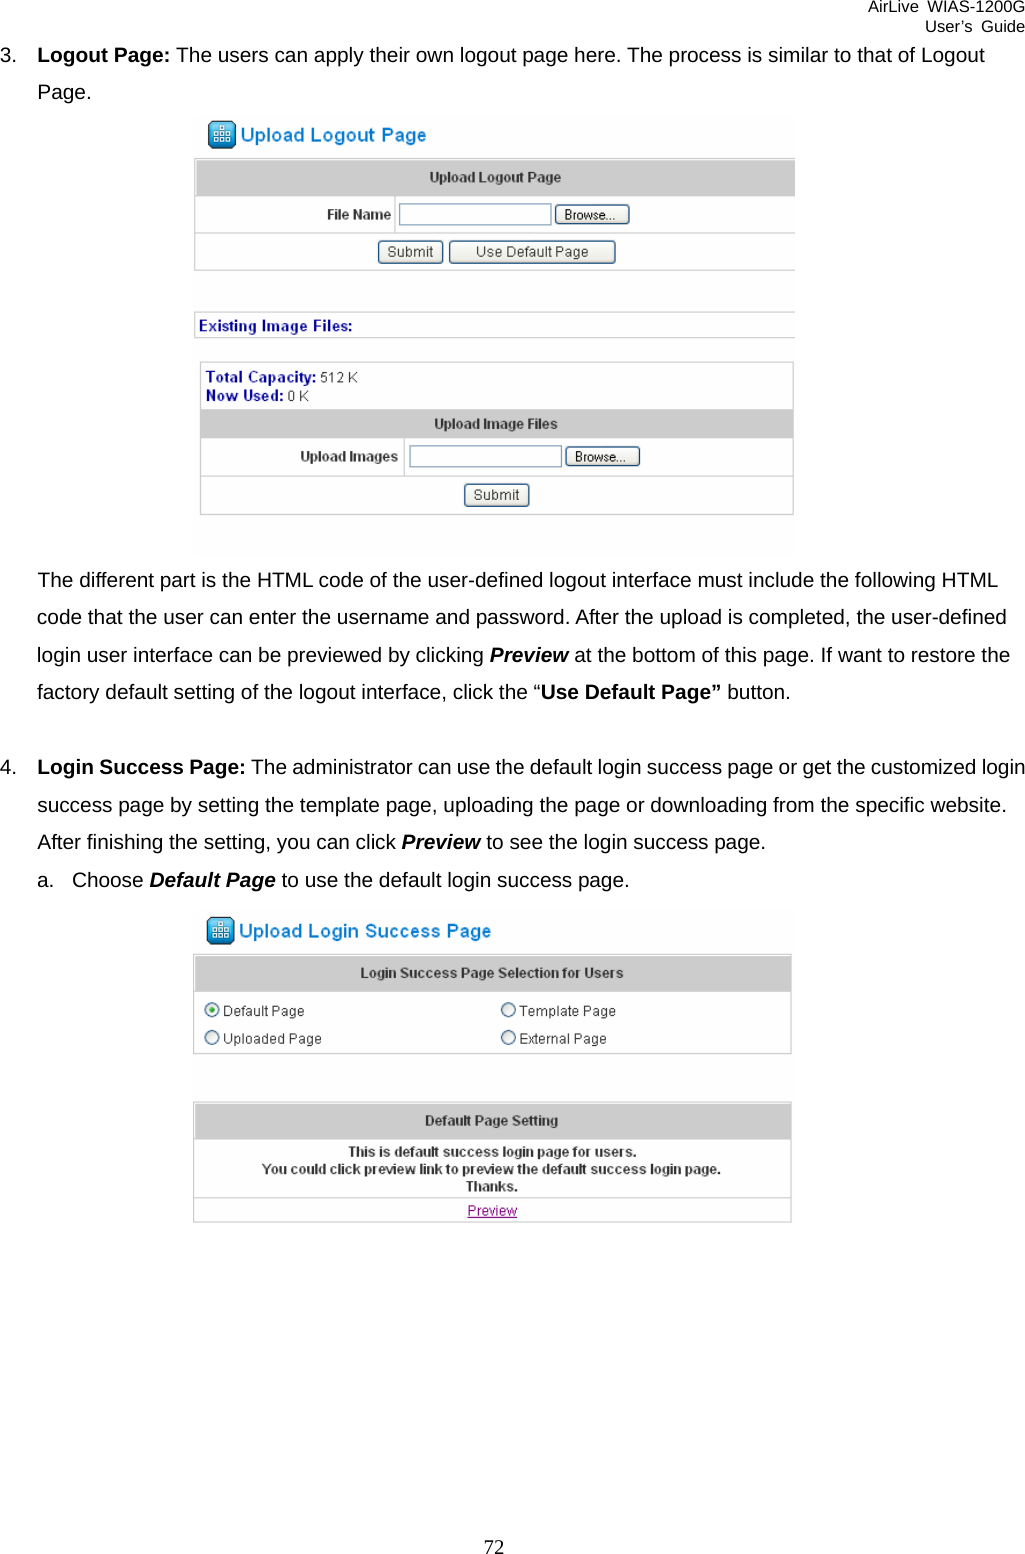 AirLive WIAS-1200G User’s Guide 72 3.  Logout Page: The users can apply their own logout page here. The process is similar to that of Logout Page.    The different part is the HTML code of the user-defined logout interface must include the following HTML code that the user can enter the username and password. After the upload is completed, the user-defined login user interface can be previewed by clicking Preview at the bottom of this page. If want to restore the factory default setting of the logout interface, click the “Use Default Page” button.  4.  Login Success Page: The administrator can use the default login success page or get the customized login success page by setting the template page, uploading the page or downloading from the specific website. After finishing the setting, you can click Preview to see the login success page.   a. Choose Default Page to use the default login success page.   